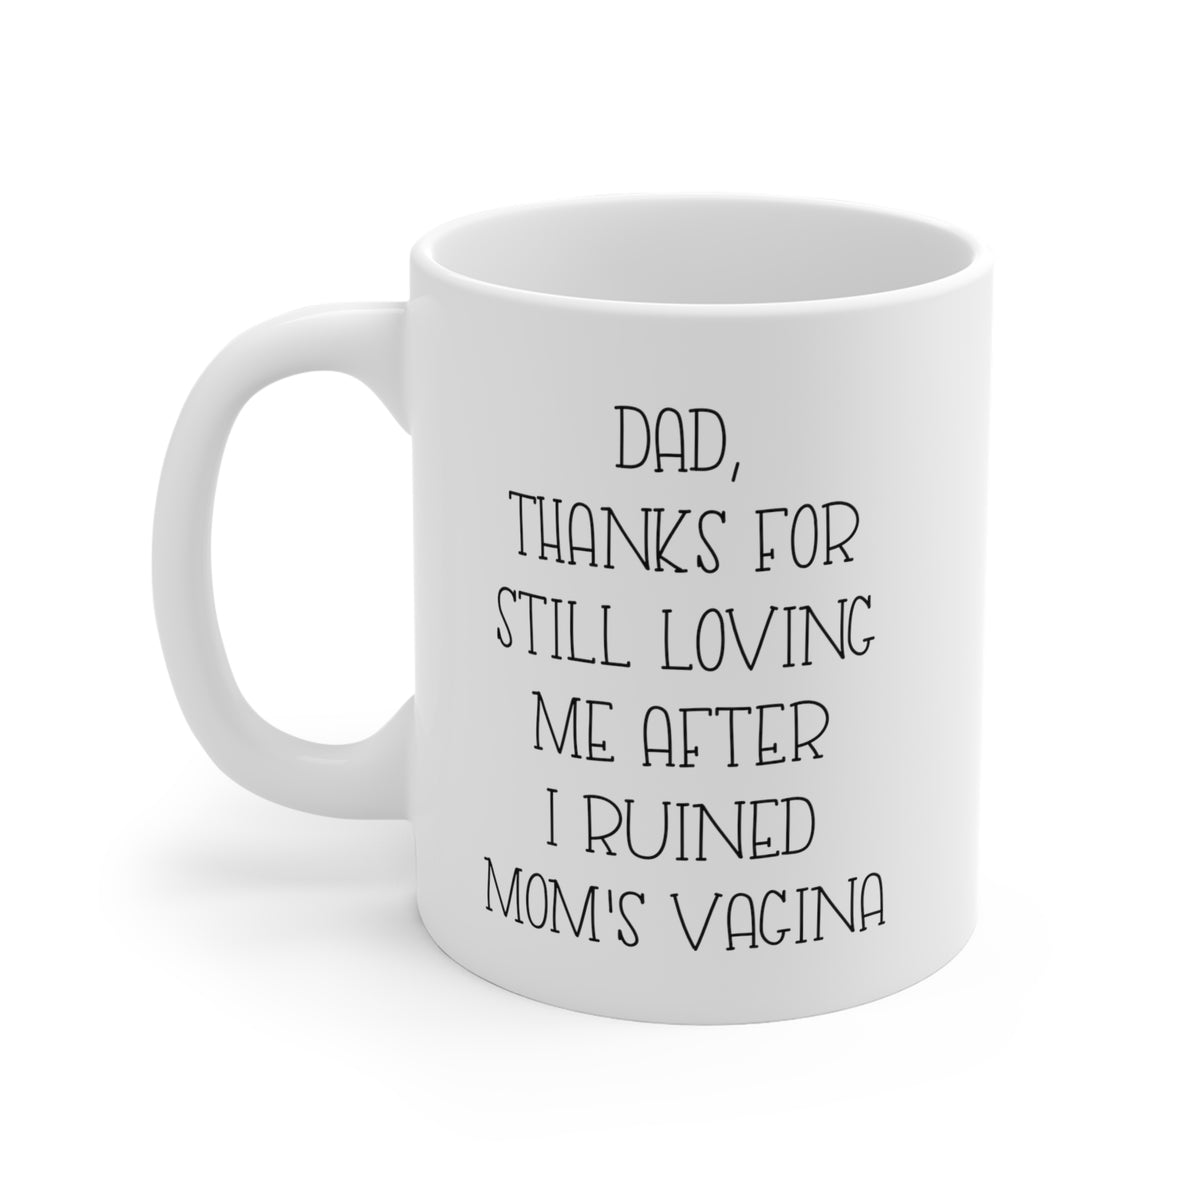 Funny Dad Coffee Mug, Dad, Thanks For Still Loving Me After I Ruined Mom's Vagina, Father